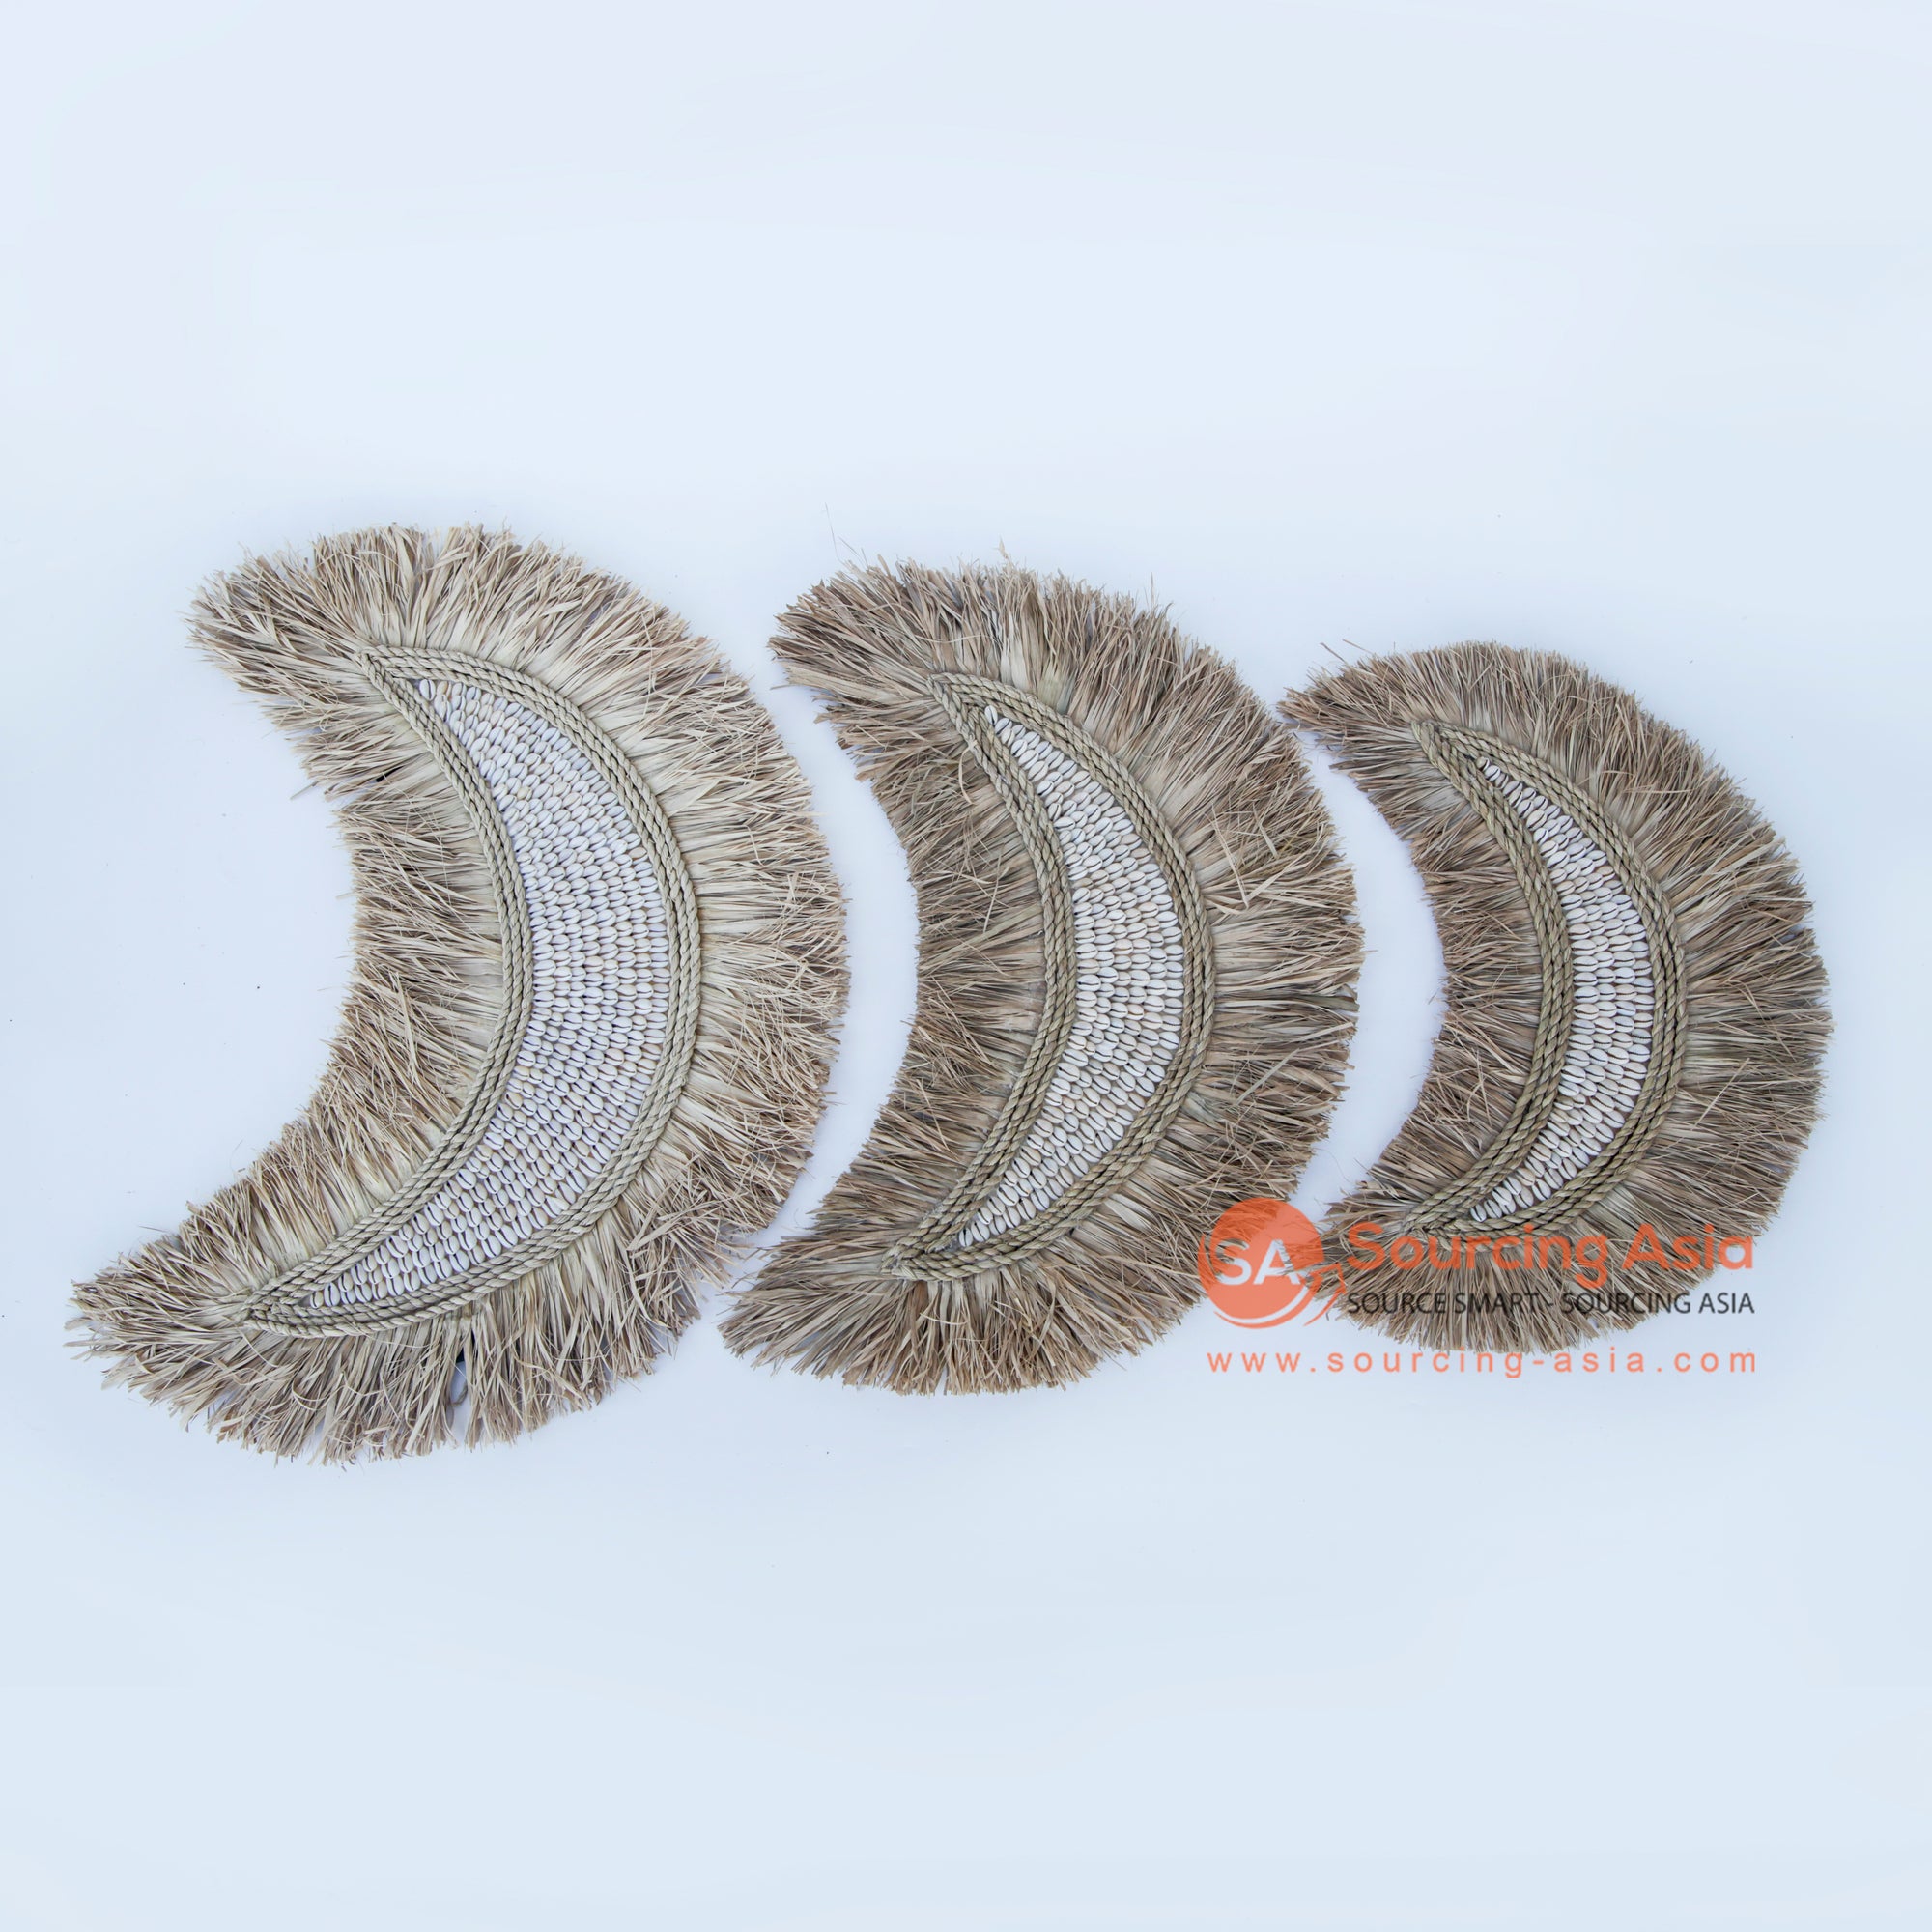 DHL035 SET OF THREE NATURAL DRIED RAFFIA AND SHELL CRESCENT MOON WALL DECORATIONS